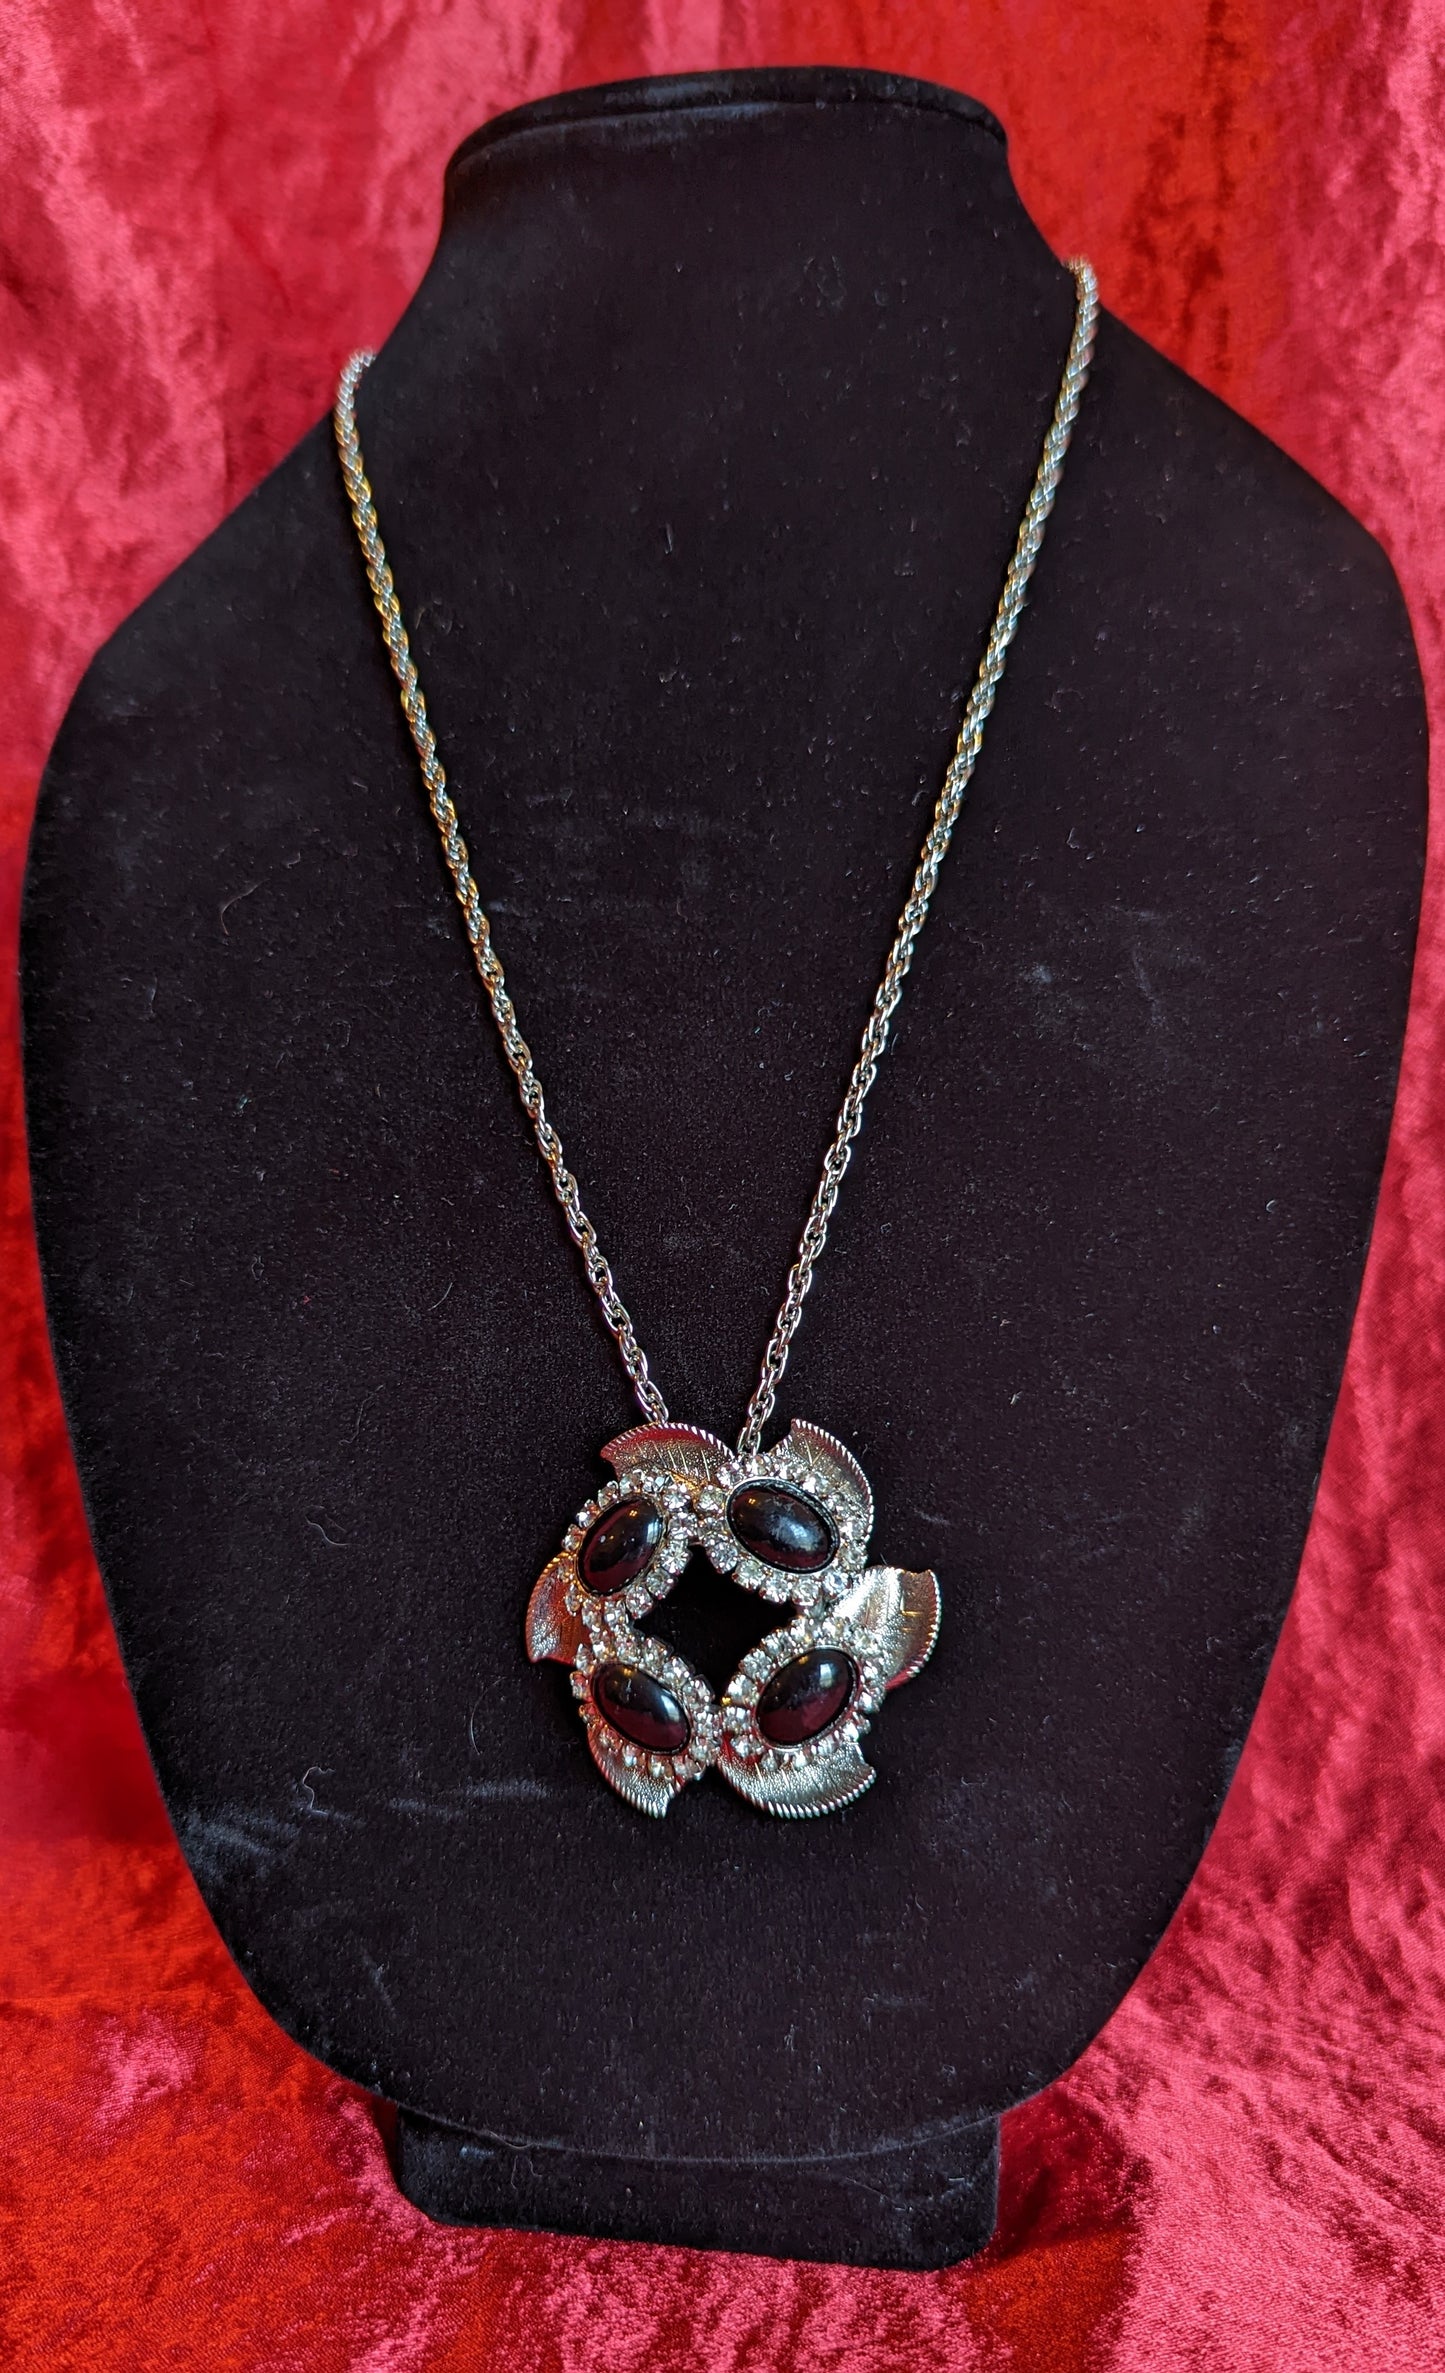 Silver Tone Floral Pendant Necklace with Black Glass Cabochon